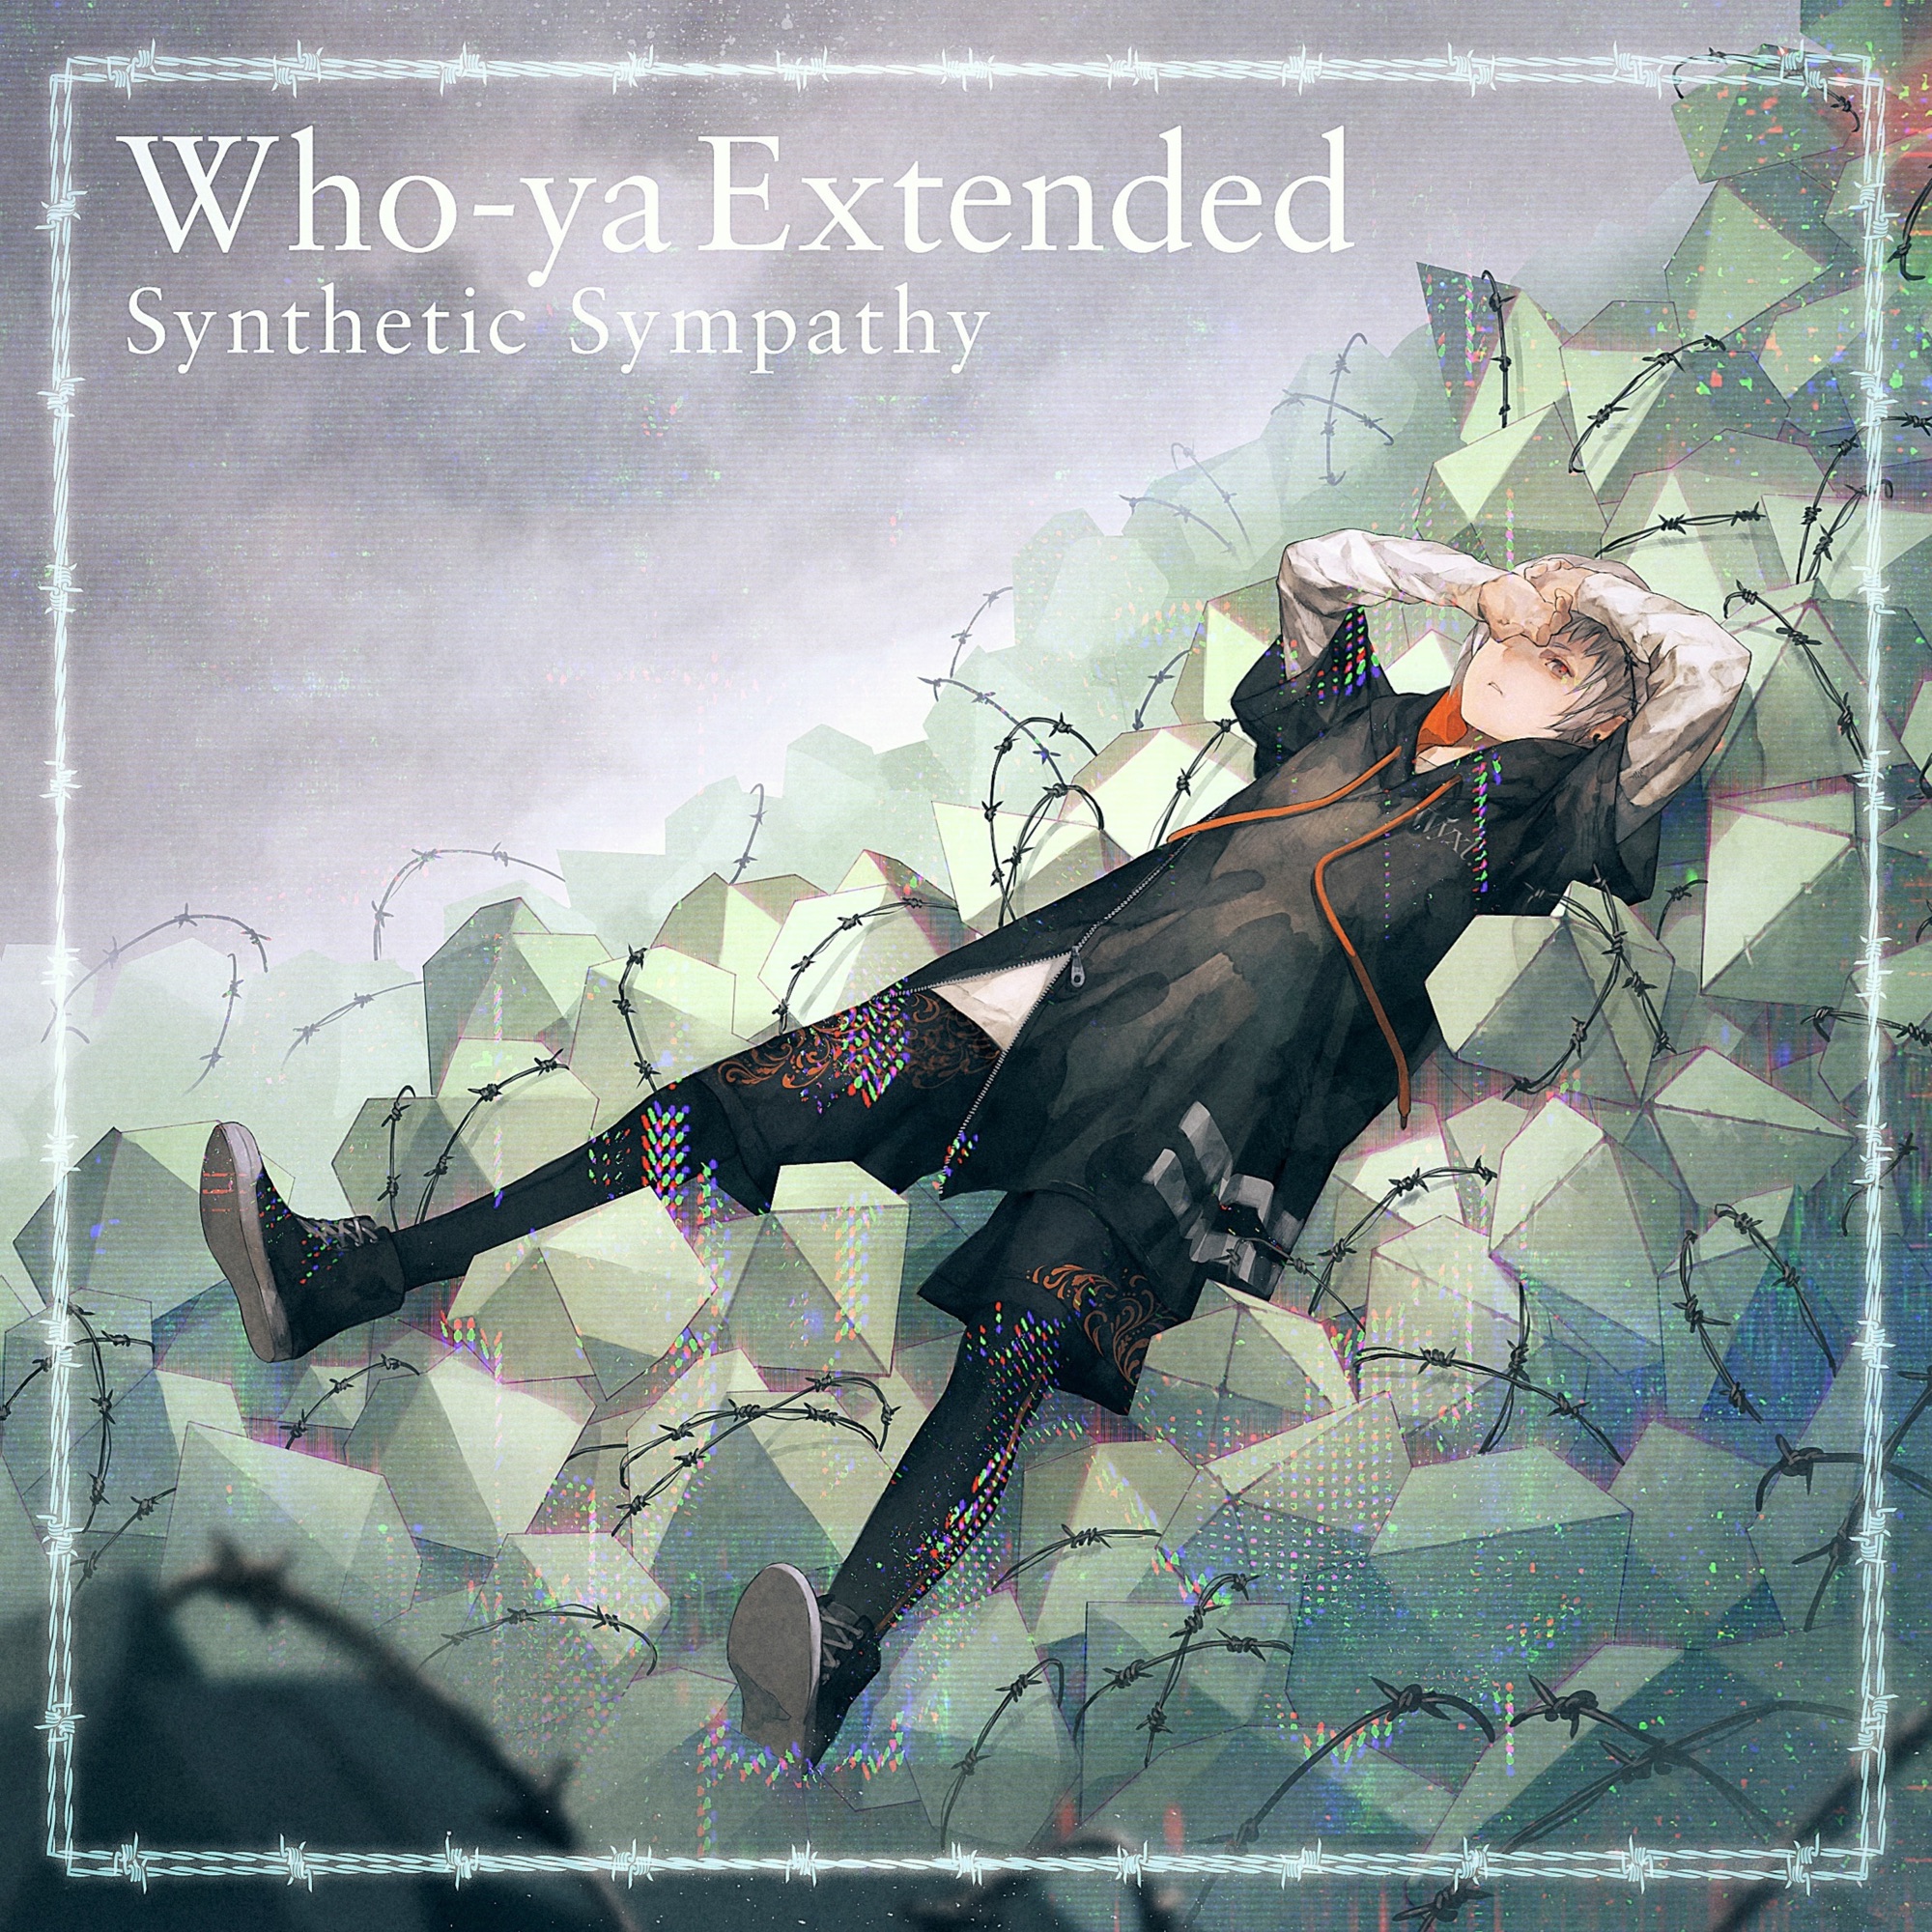 Who-ya Extended - Synthetic Sympathy